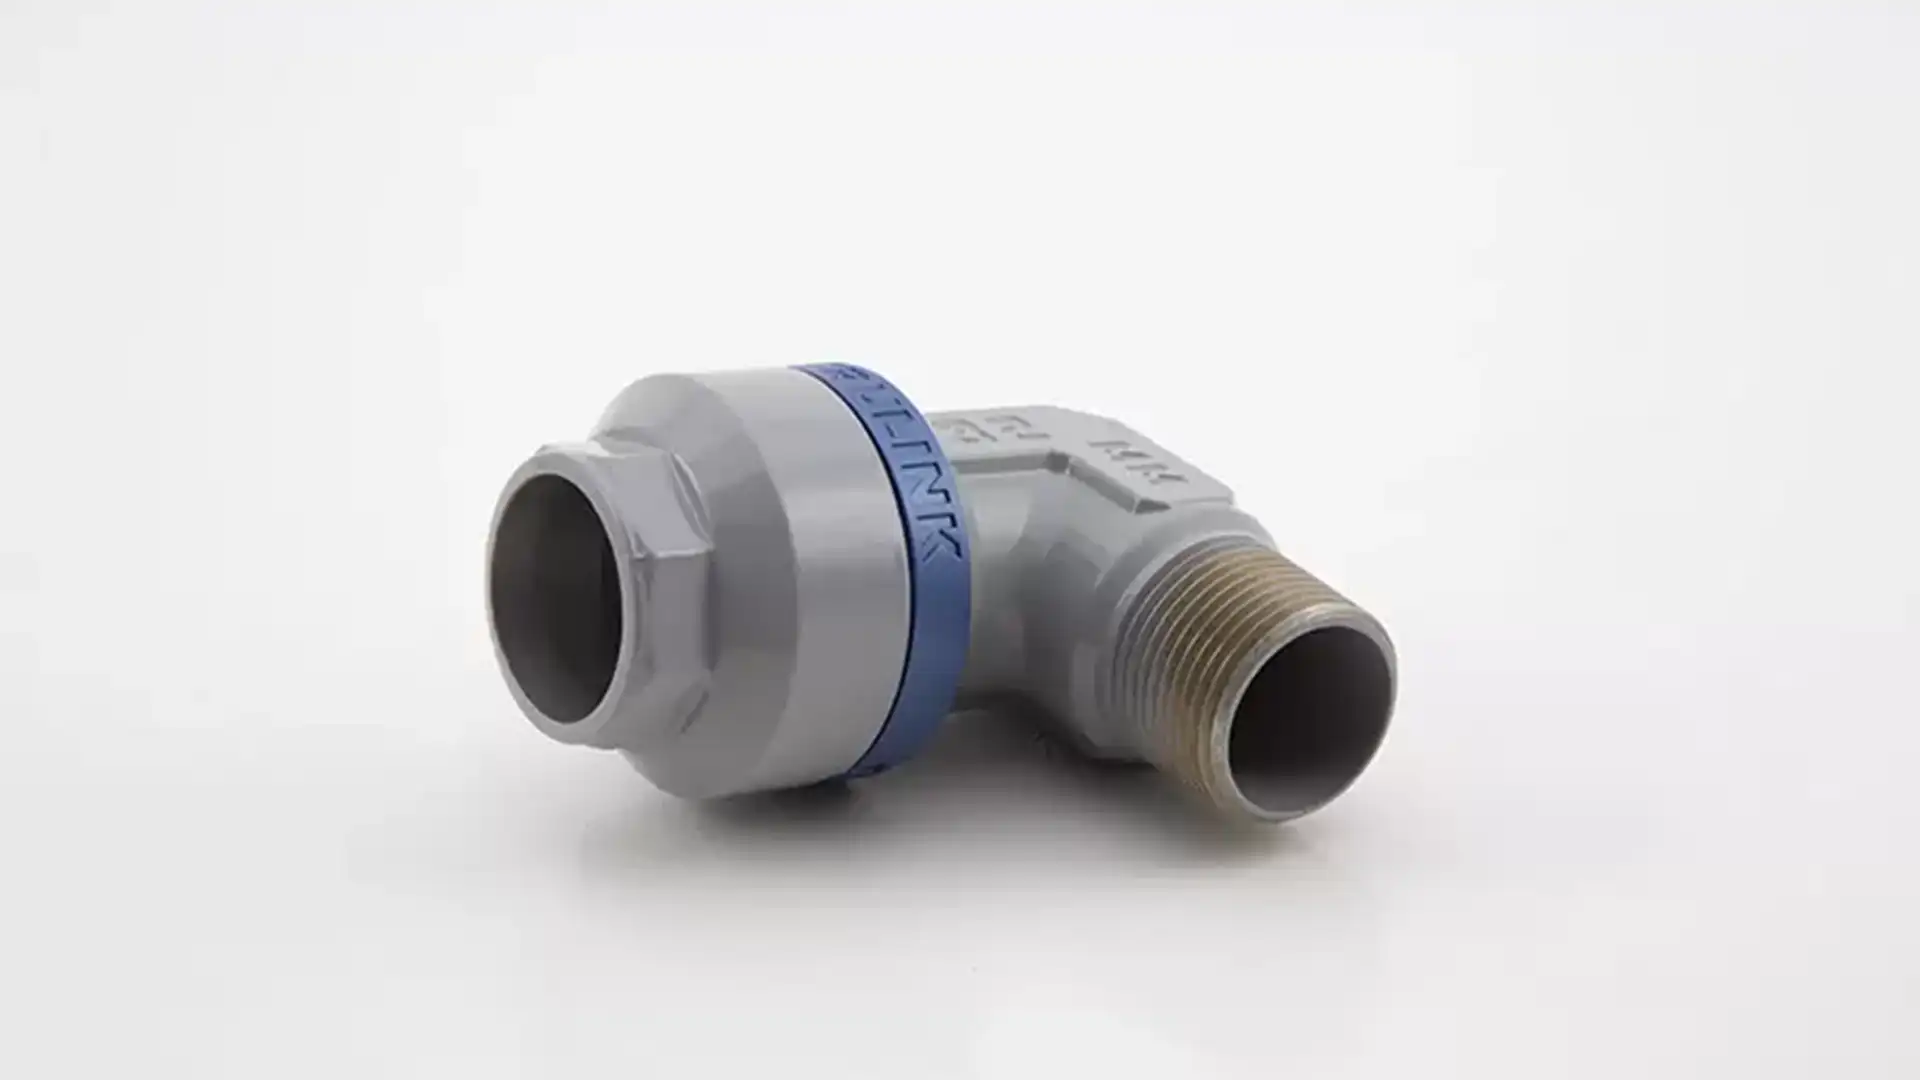 Product shot of elbow pipe connector.